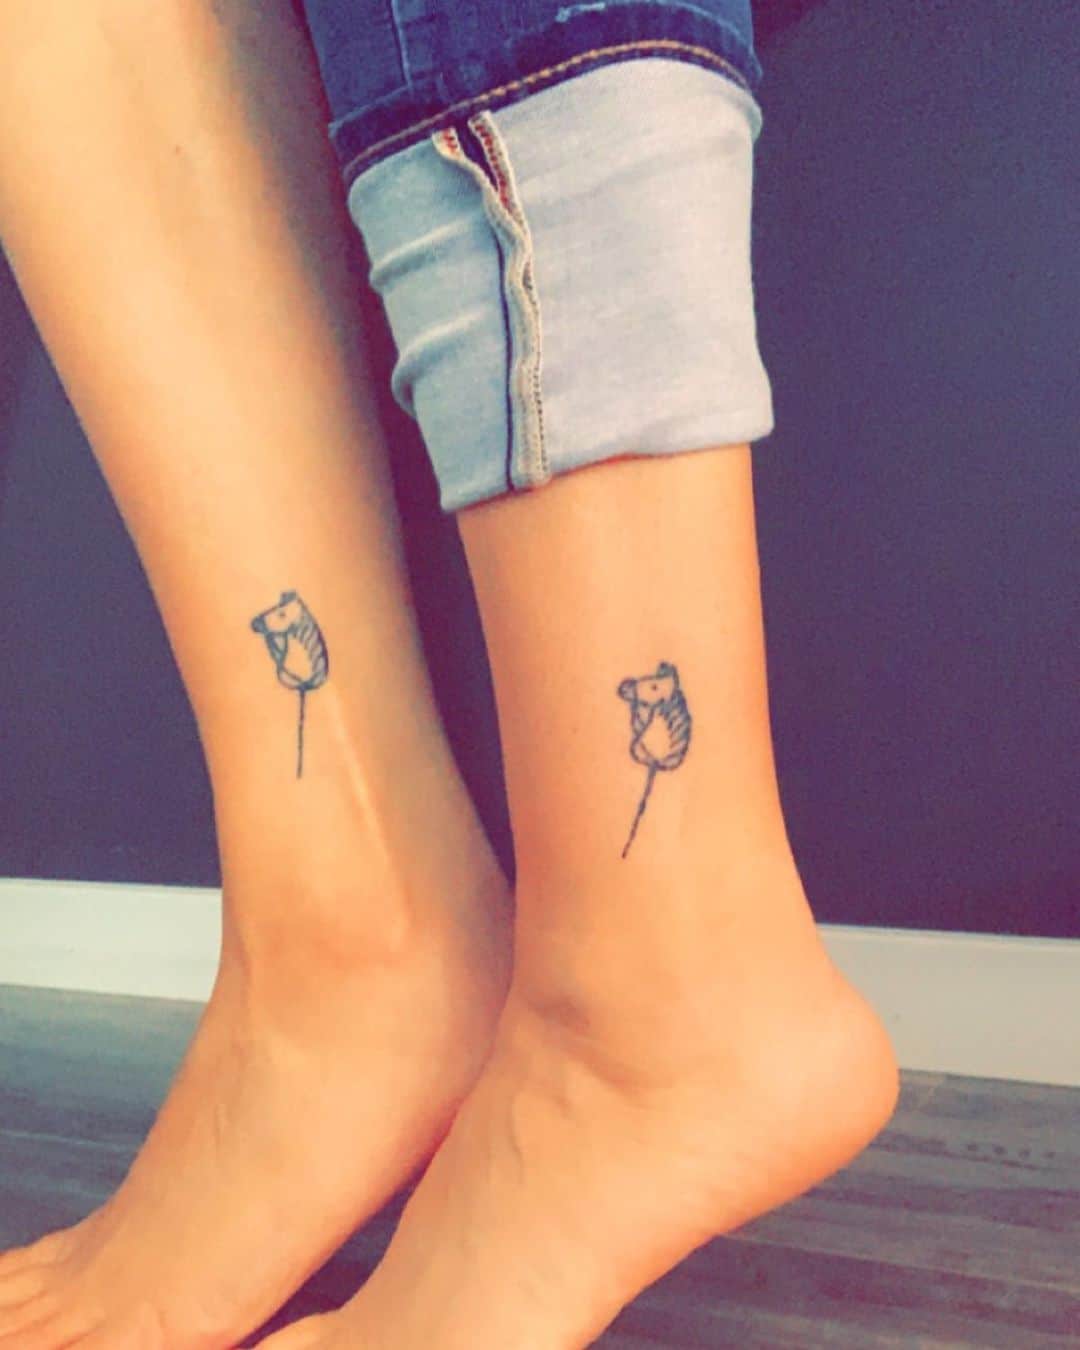 Weird but funny ‘giddy up’ matching tattoos for BFs